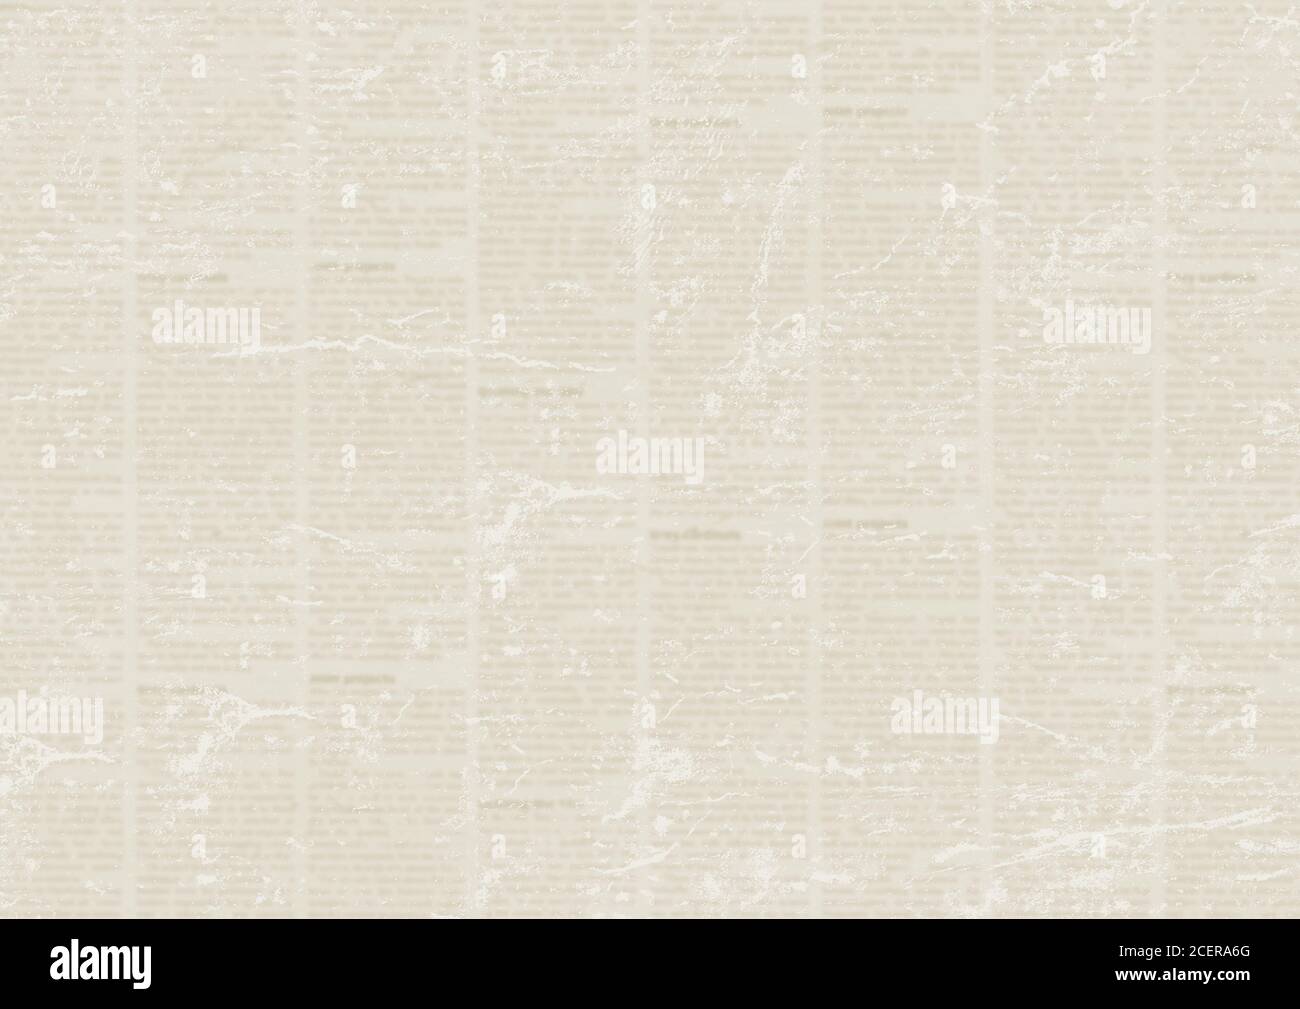 Old Vintage Grunge Newspaper Paper Texture Background Stock Photo - Image  of dirty, print: 169918528